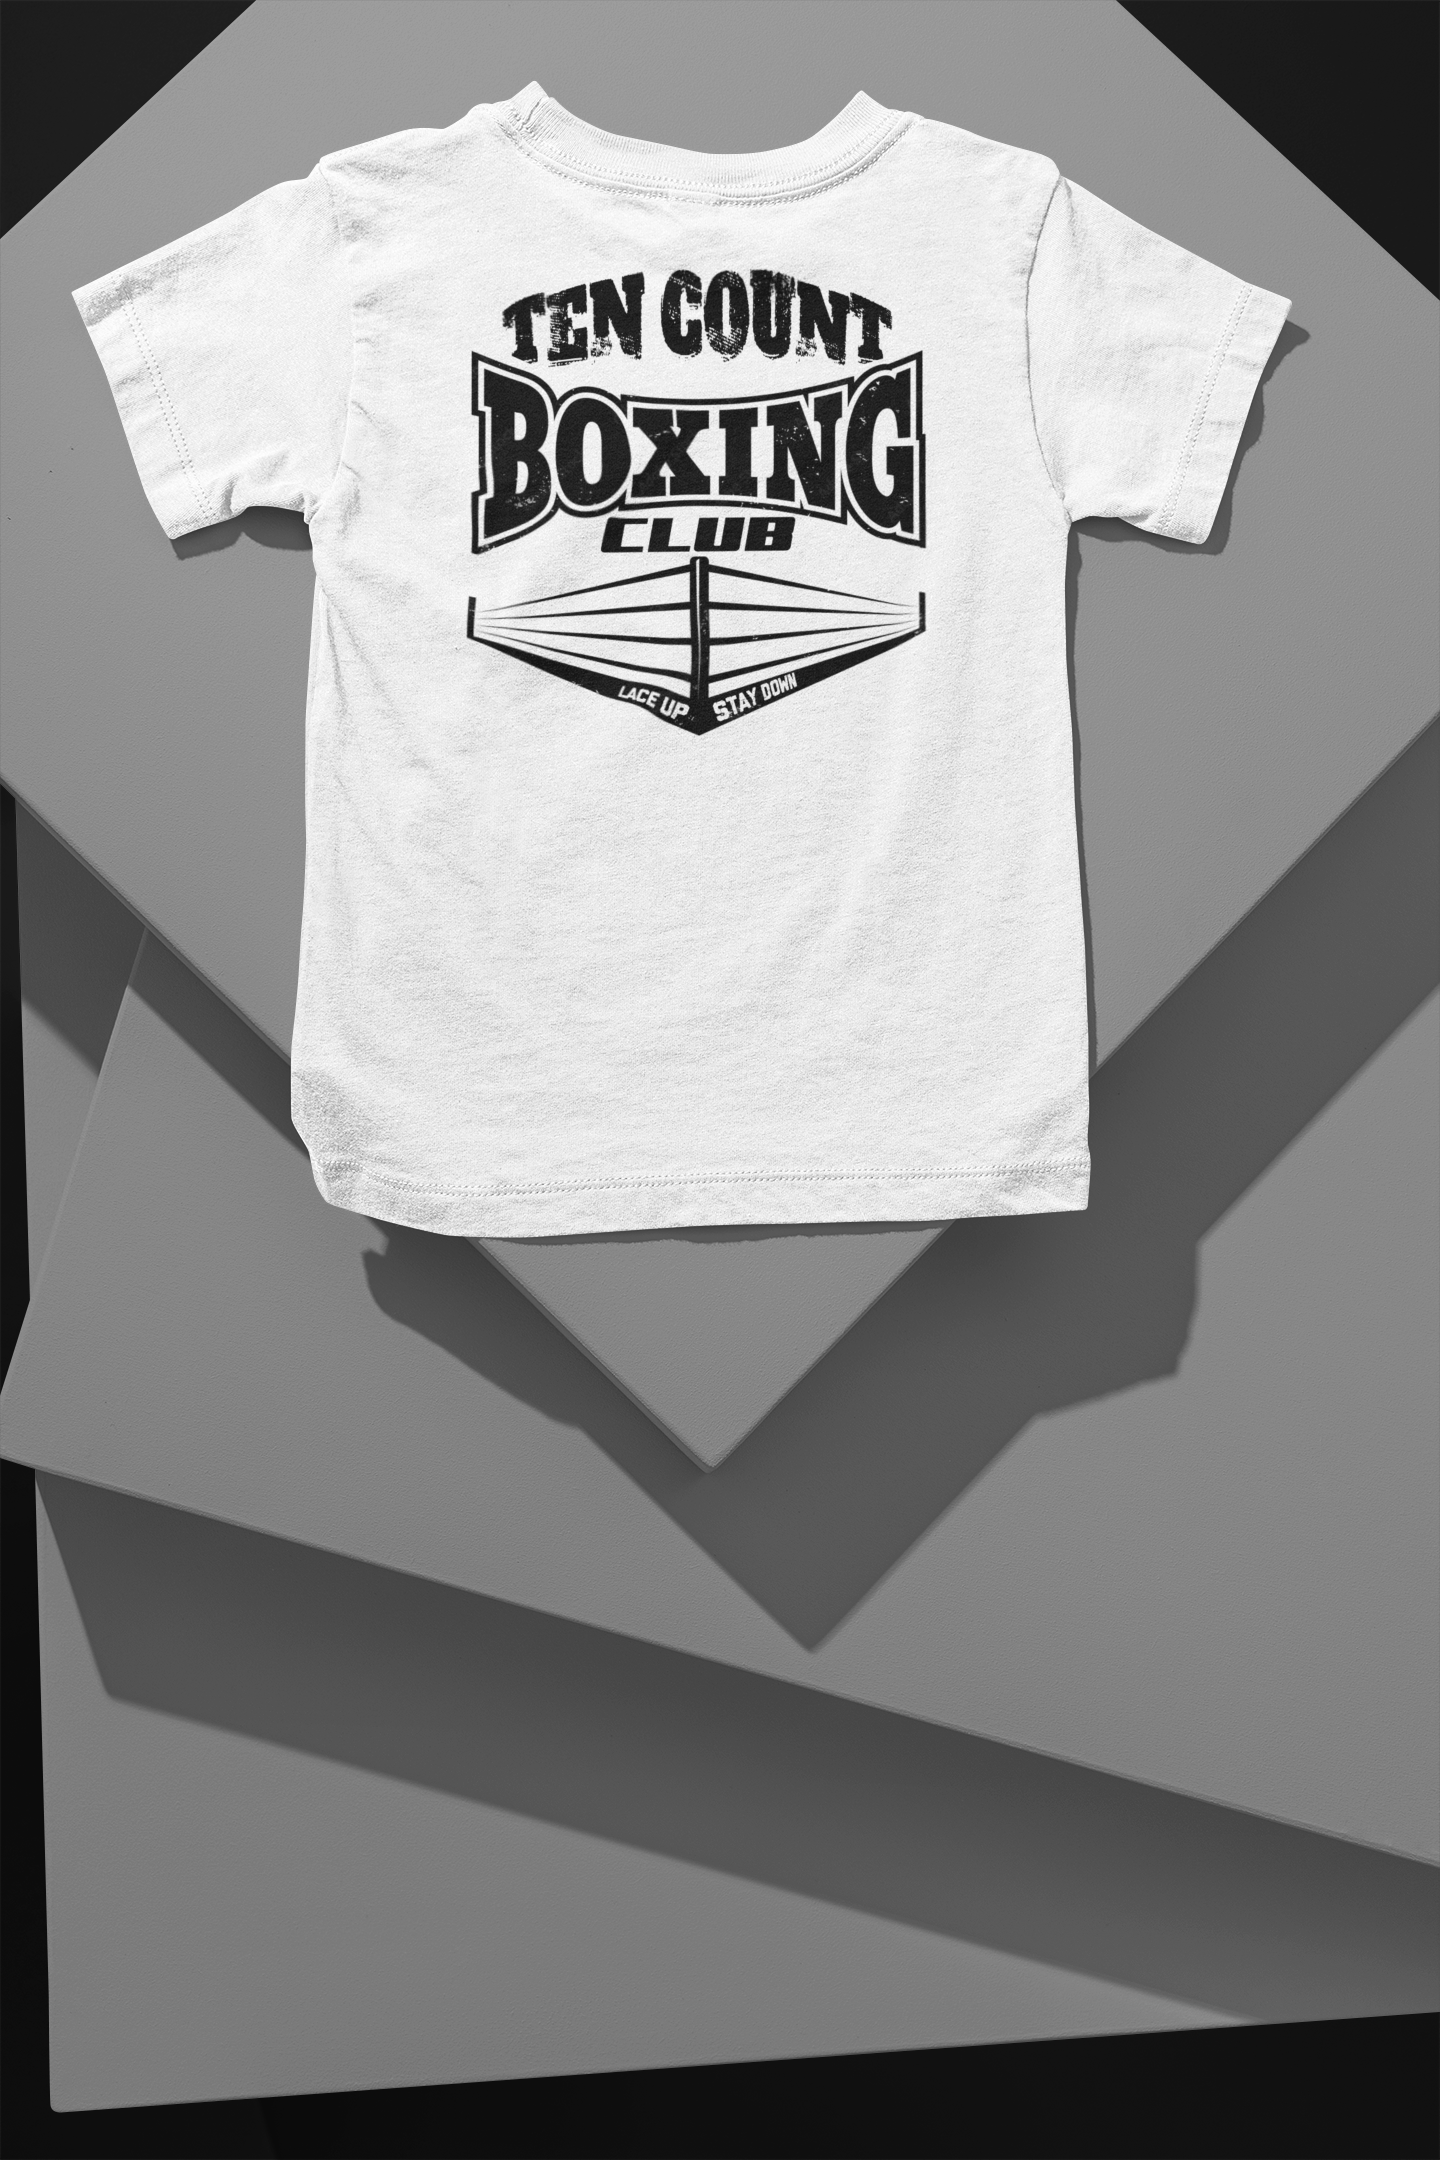 10 Count Boxing Club - Boxing / Workout T Shirt